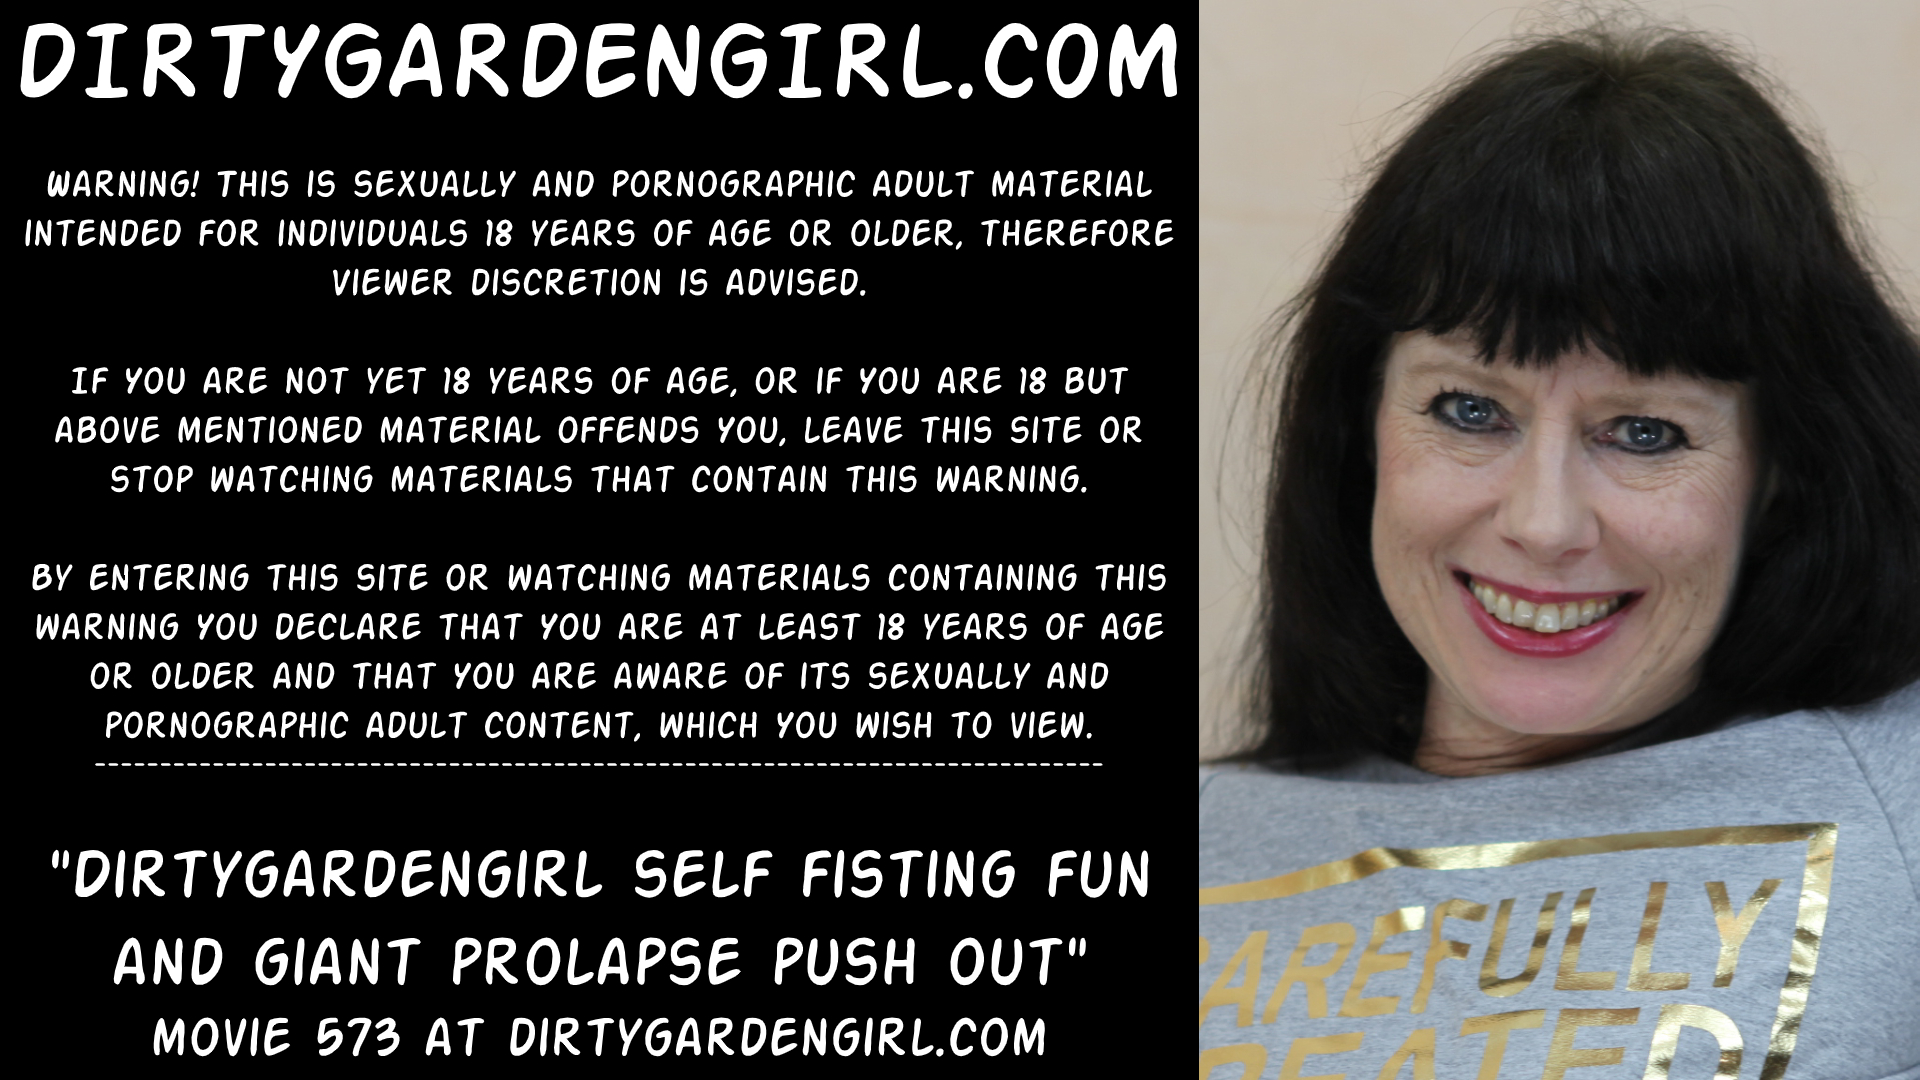 Dirtygardengirl self fisting fun and giant prolapse push out